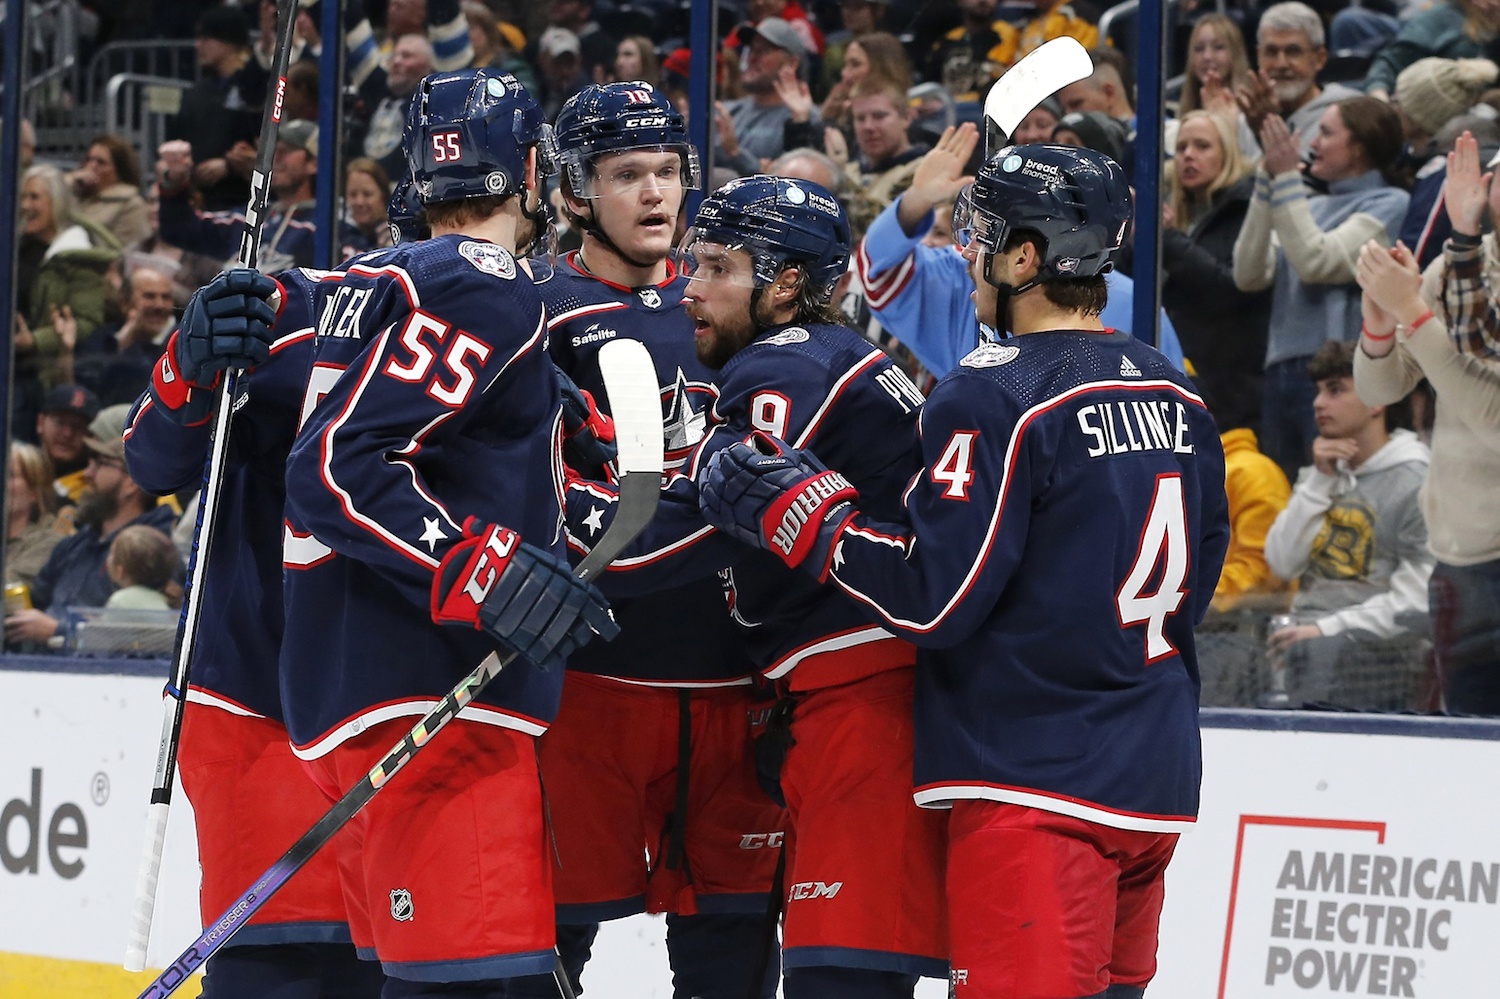 Nov 27, 2023; Columbus, Ohio, USA; Columbus Blue Jackets defenseman Ivan Provorov (9) celebrates his goal against the Boston Bruins during the second period at Nationwide Arena. Mandatory Credit: Russell LaBounty-USA TODAY Sports